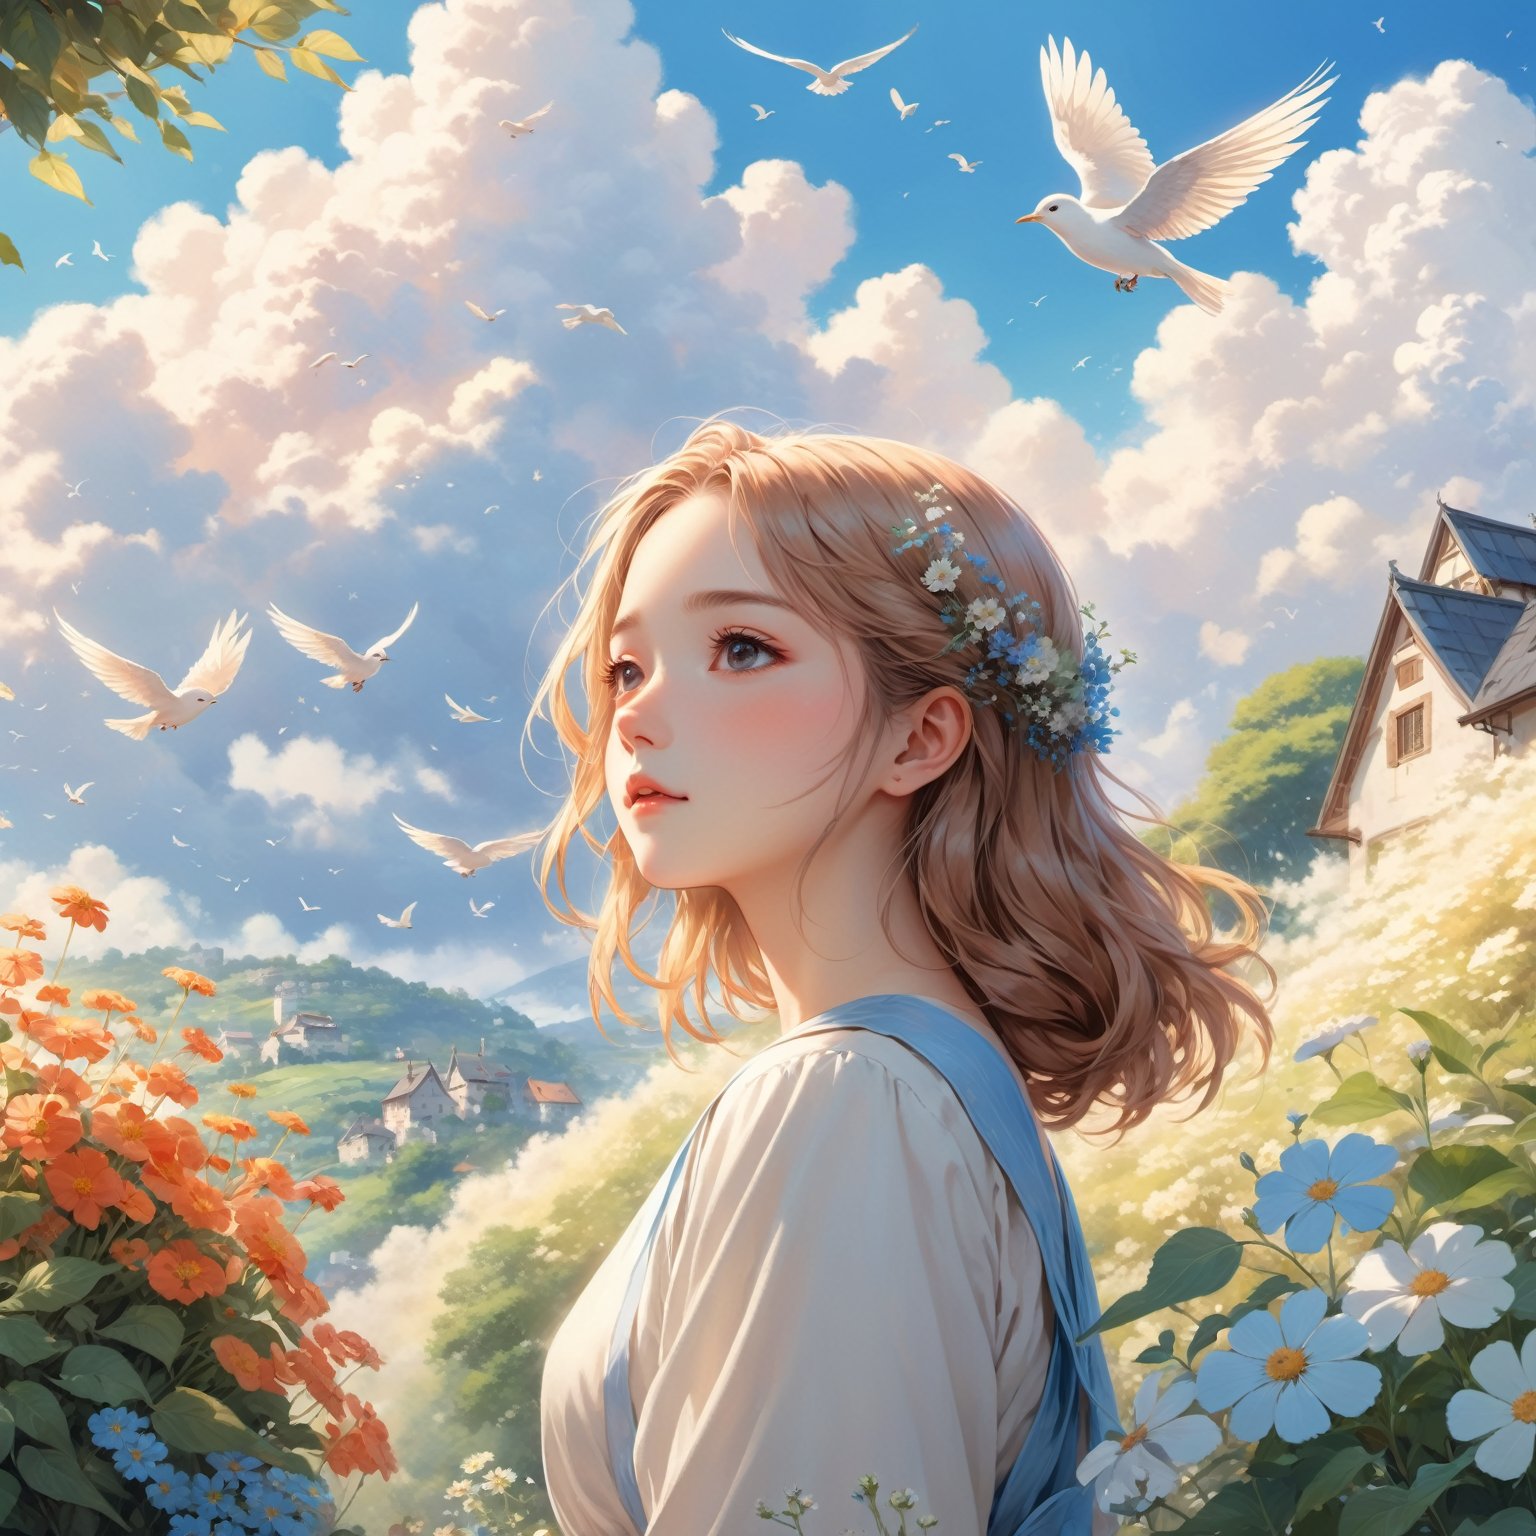 (best quality,illustration,masterpiece:1.2,high-res:1.1),illustration,1girl,cute girl,floral,cloud,bird,flowers in herhair,peaceful scene,soft sunlight,harmonious colors,vibrant atmosphere,dreamy,vivid details,gentle breeze,fairytale-like,delicate lines,pastel colors,serene,vibrant blue sky,serene expression,beautiful landscape,serenity,harmony,blissful,garden scenery,pleasant,magical,tranquil,charming,whimsical

,Anime 